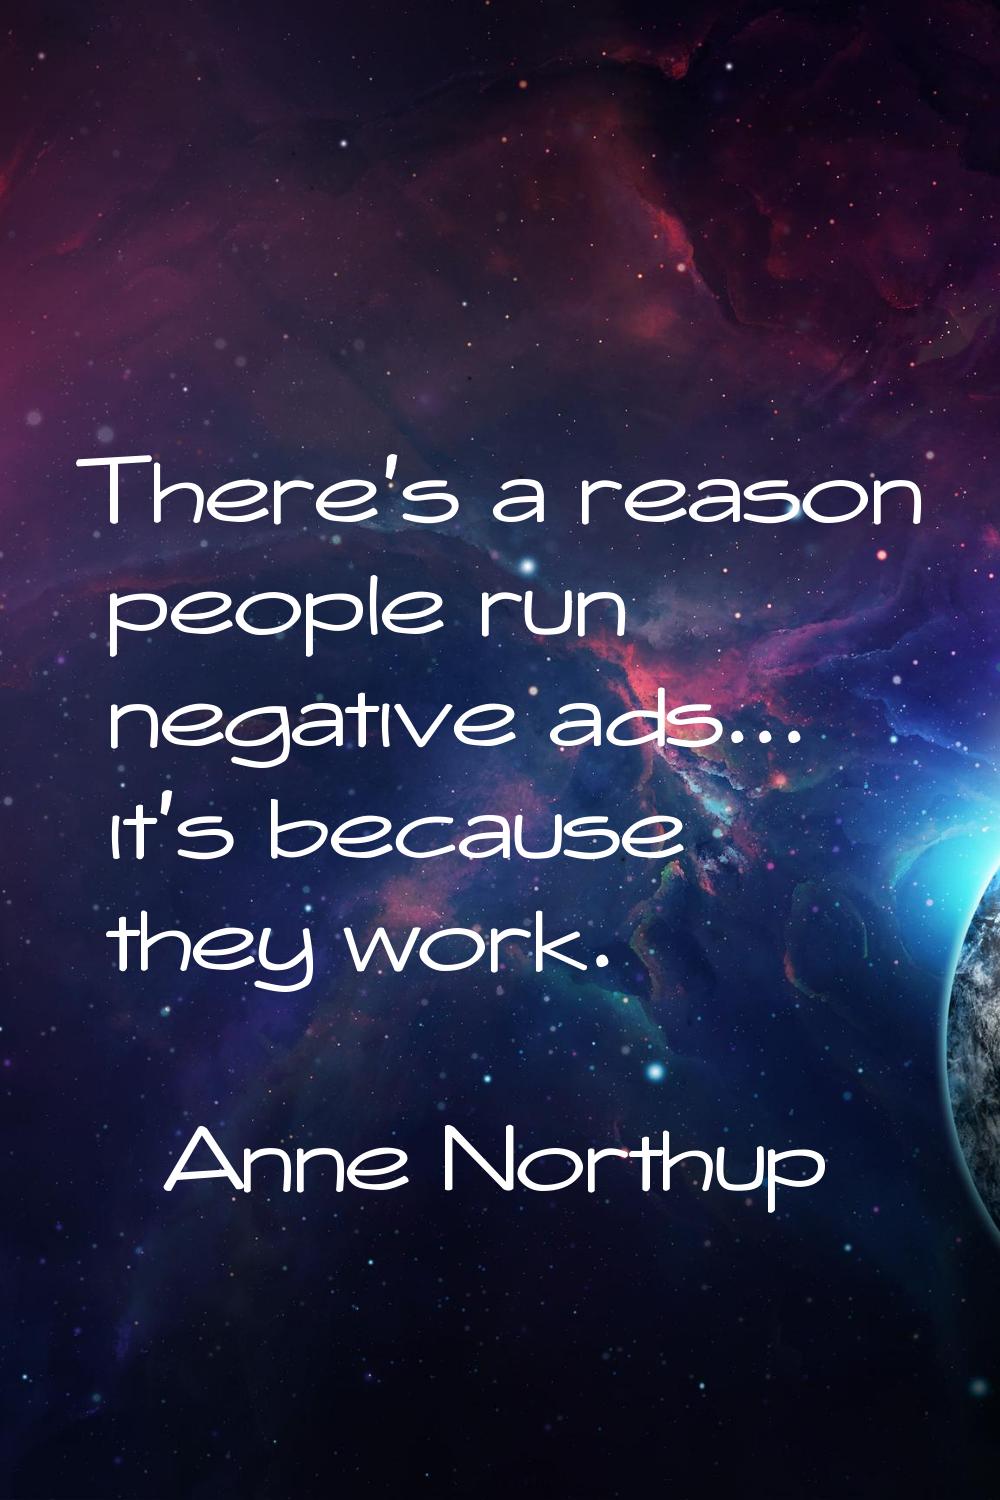 There's a reason people run negative ads... it's because they work.